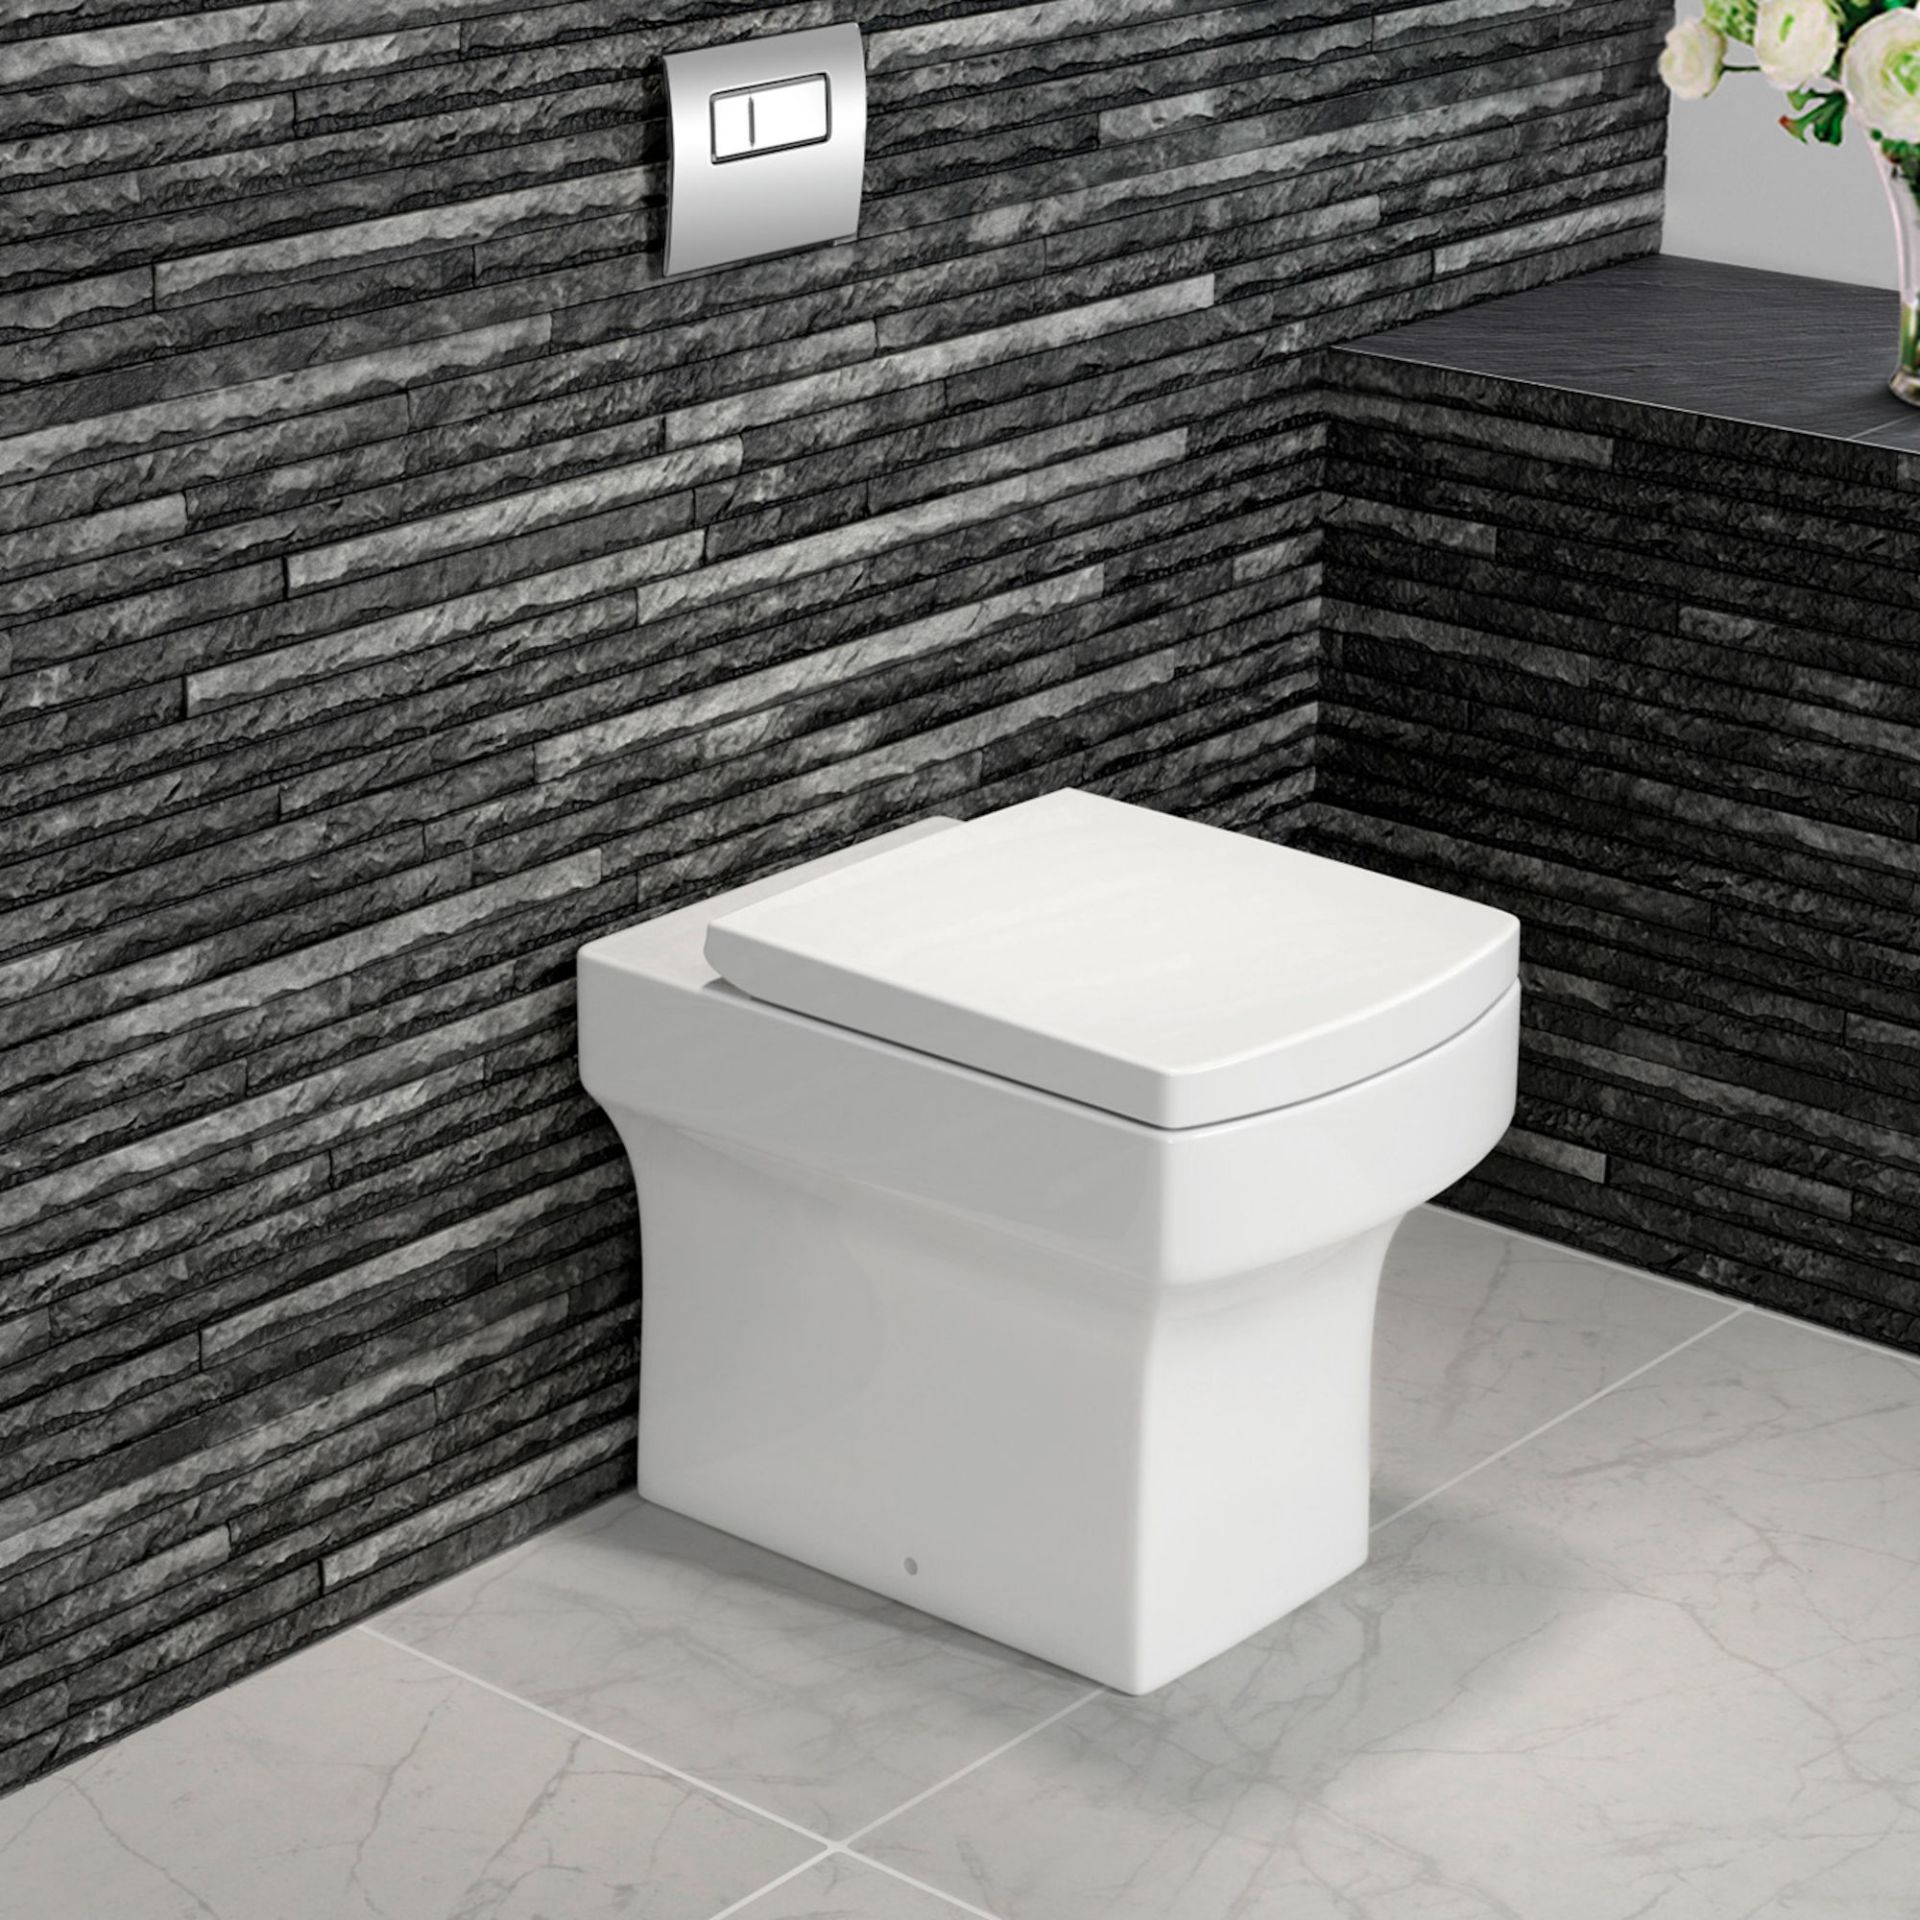 (ZL180) Belfort Back to Wall Toilet inc Soft Close Seat. Made from White Vitreous China Anti-scratch